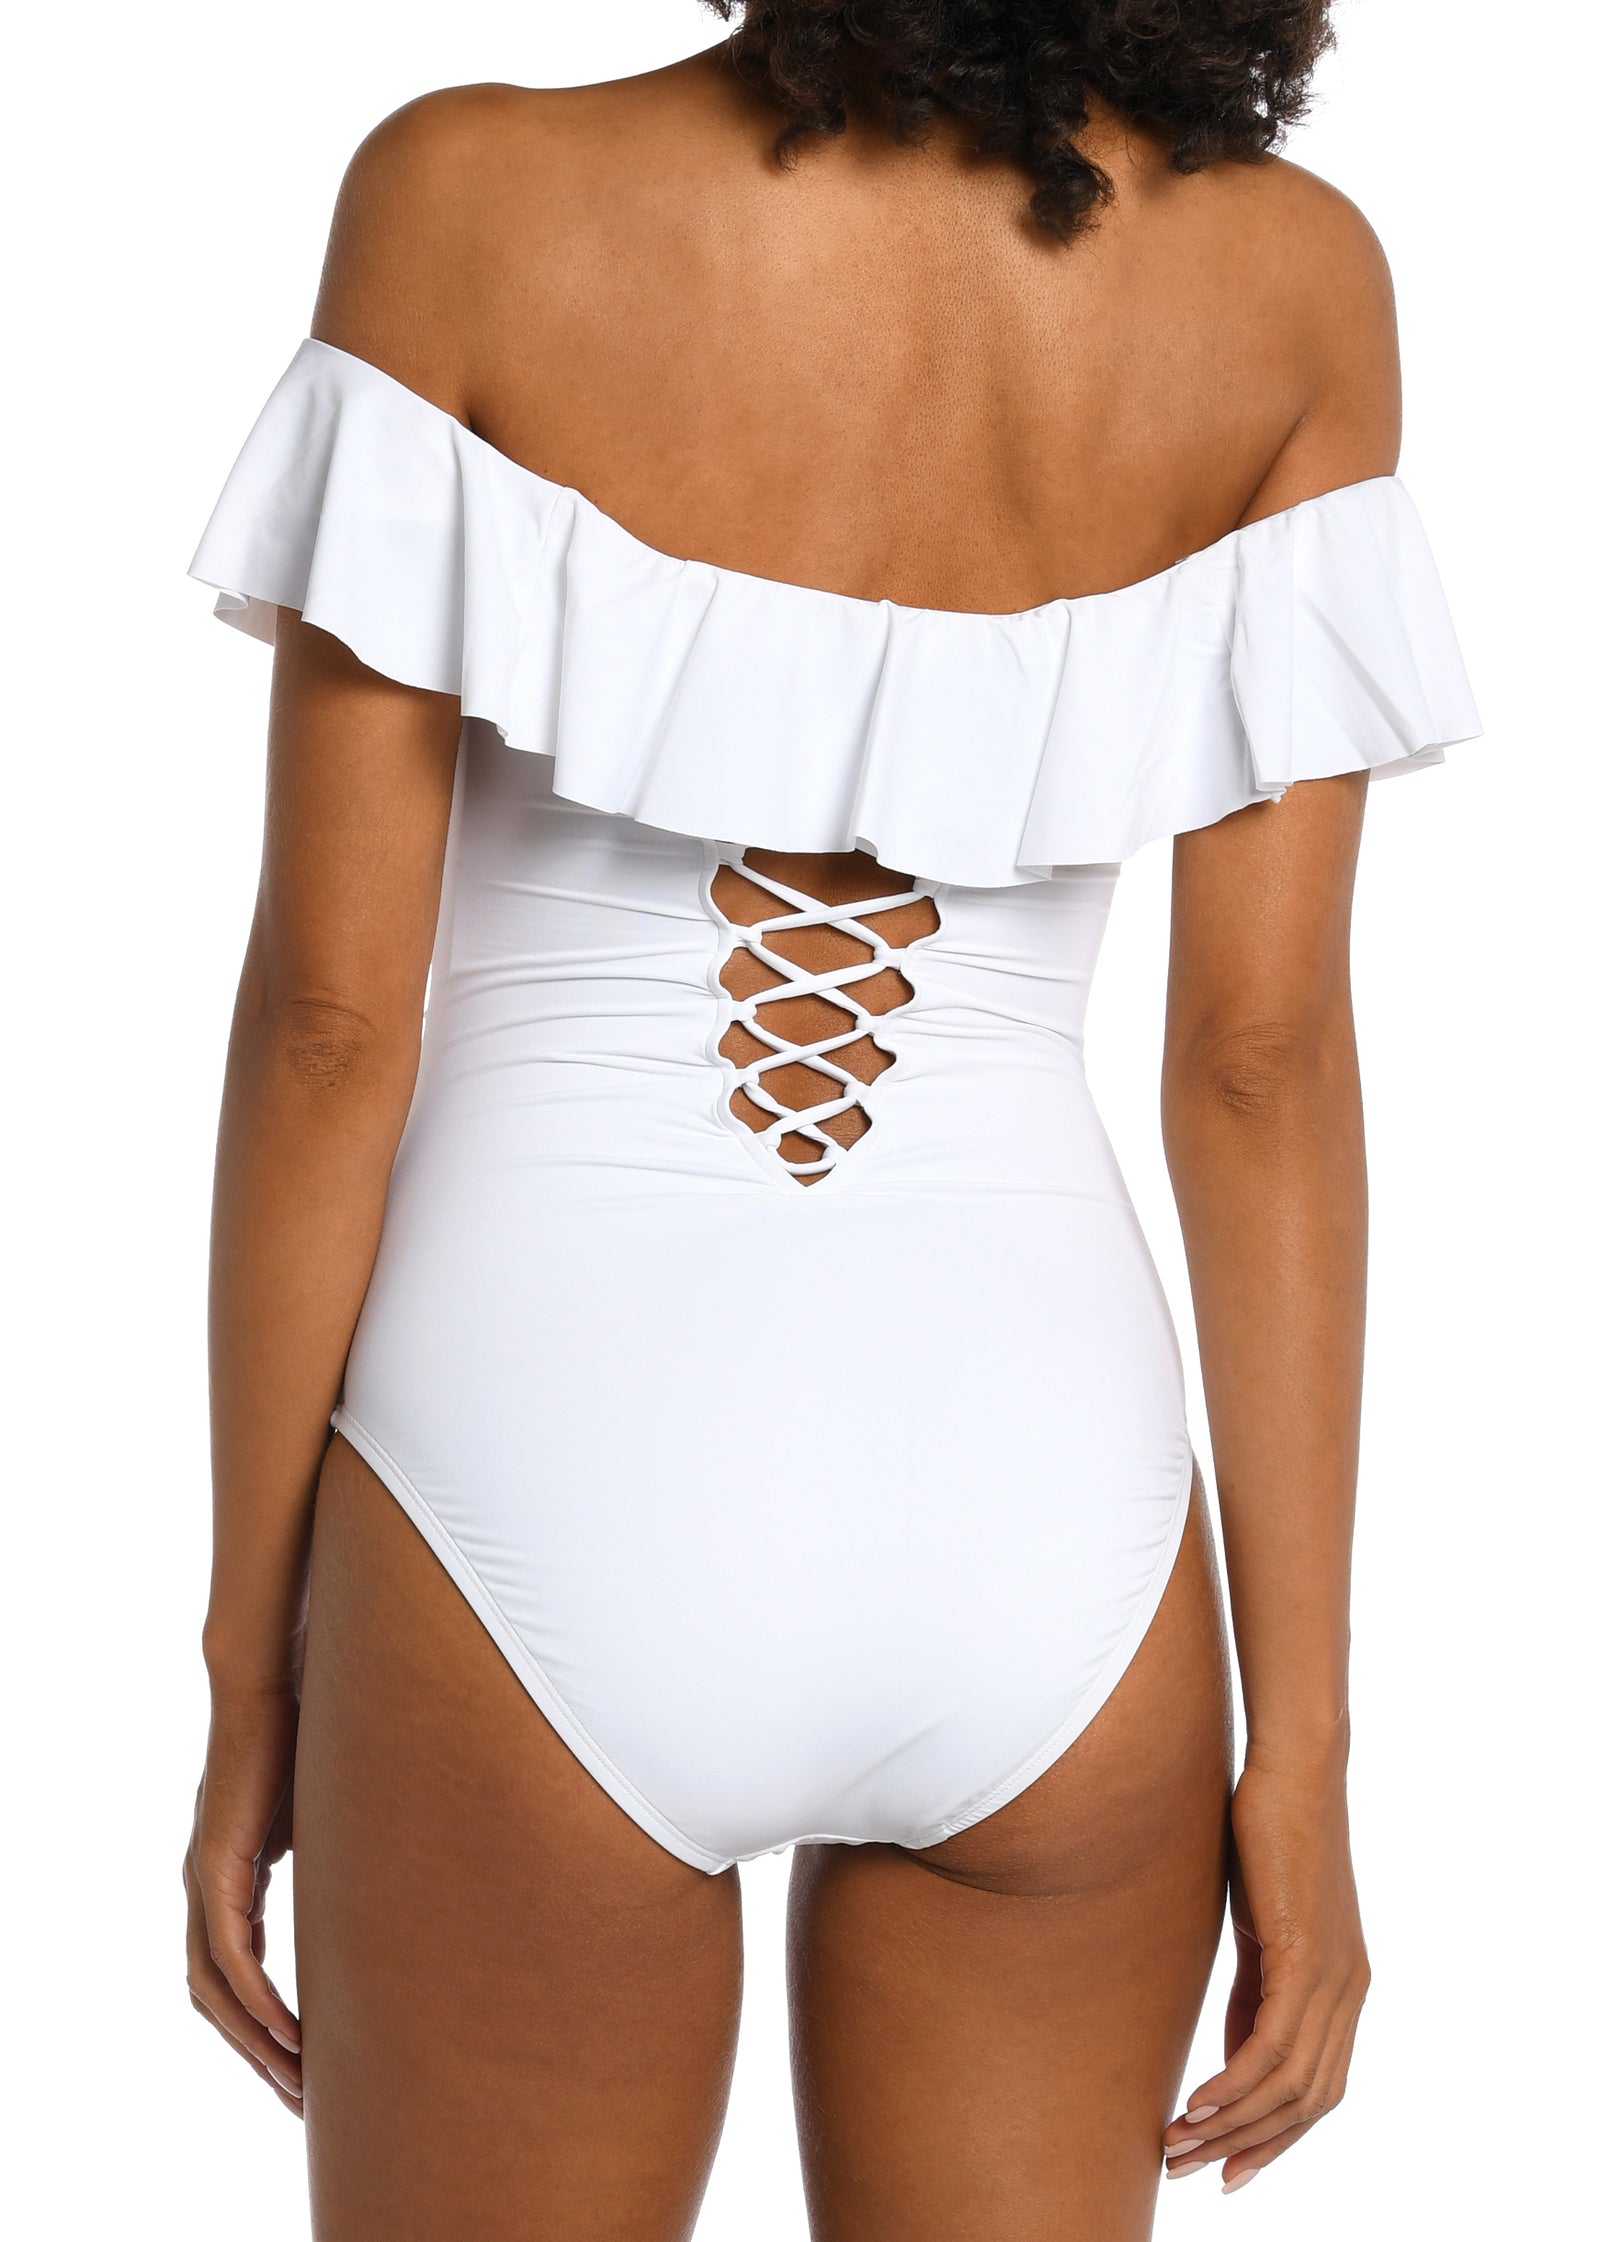 Island Goddess Collection  Off the Shoulder Ruffle Mio One Piece   Moderate Rear Coverage   Fabric Content: 83% Nylon / 17% Elastane   Product#: LB0IG11